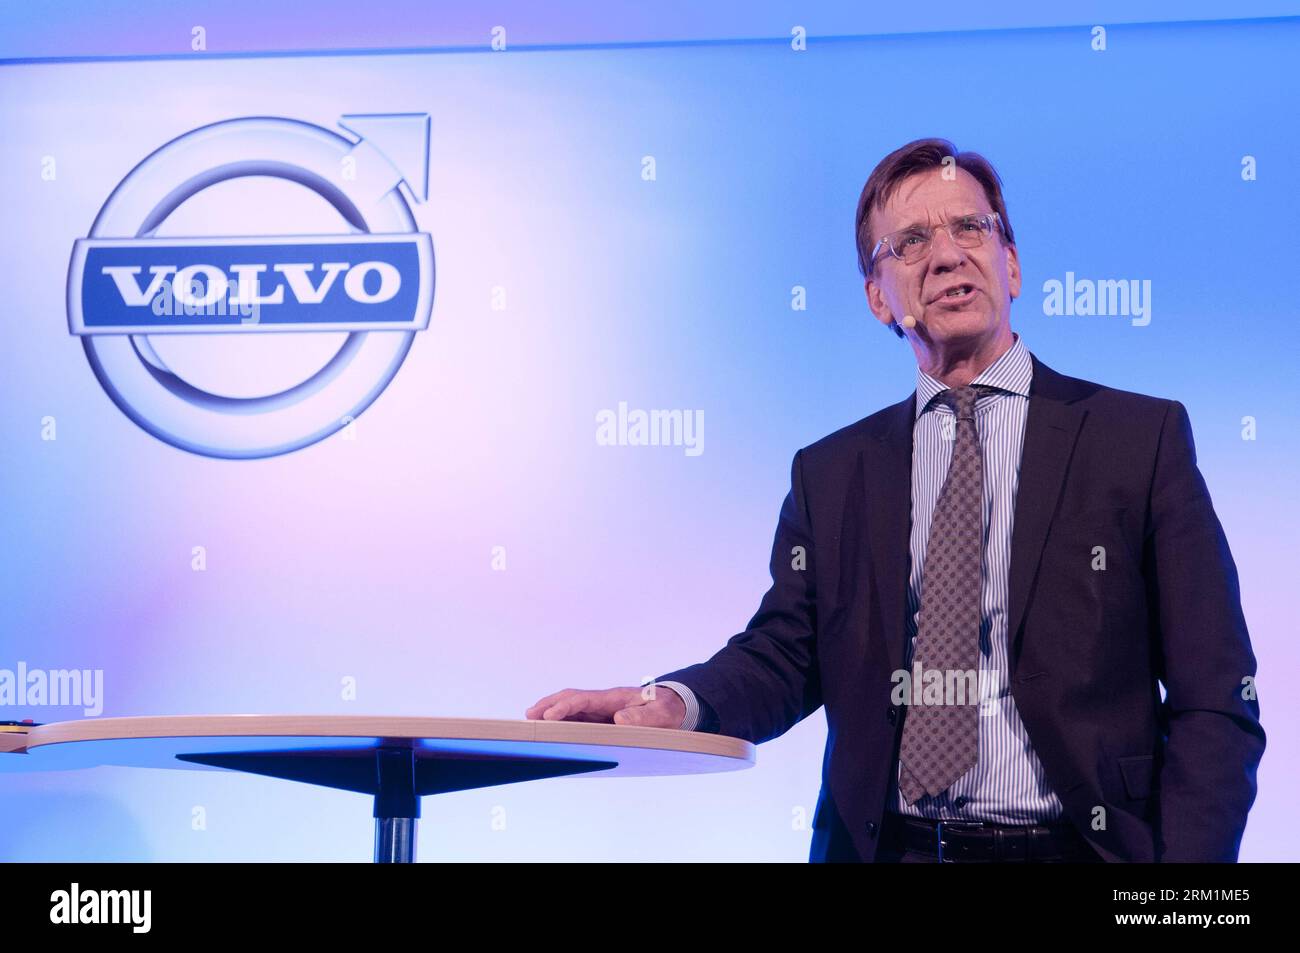 Bildnummer: 59598727  Datum: 03.05.2013  Copyright: imago/Xinhua (130503) -- STOCKHOLM, May 3, 2013 (Xinhua) -- Hakan Samuelsson, the President and CEO of Volvo Car Group, addresses a news conference in Stockholm, capital of Sweden, on May 3, 2013. The profit of Volvo Car Group slumped by 99.1 percent in 2012, being strongly affected by the economic situation in Europe, said the company in a statement on Friday. (Xinhua/Liu Yinan) (lr) SWEDEN-STOCKHOLM-CARS PROFITS-2012-SLUMPING PUBLICATIONxNOTxINxCHN People Wirtschaft PK Pressetermin Porträt xdp x0x 2013 quer premiumd      59598727 Date 03 05 Stock Photo